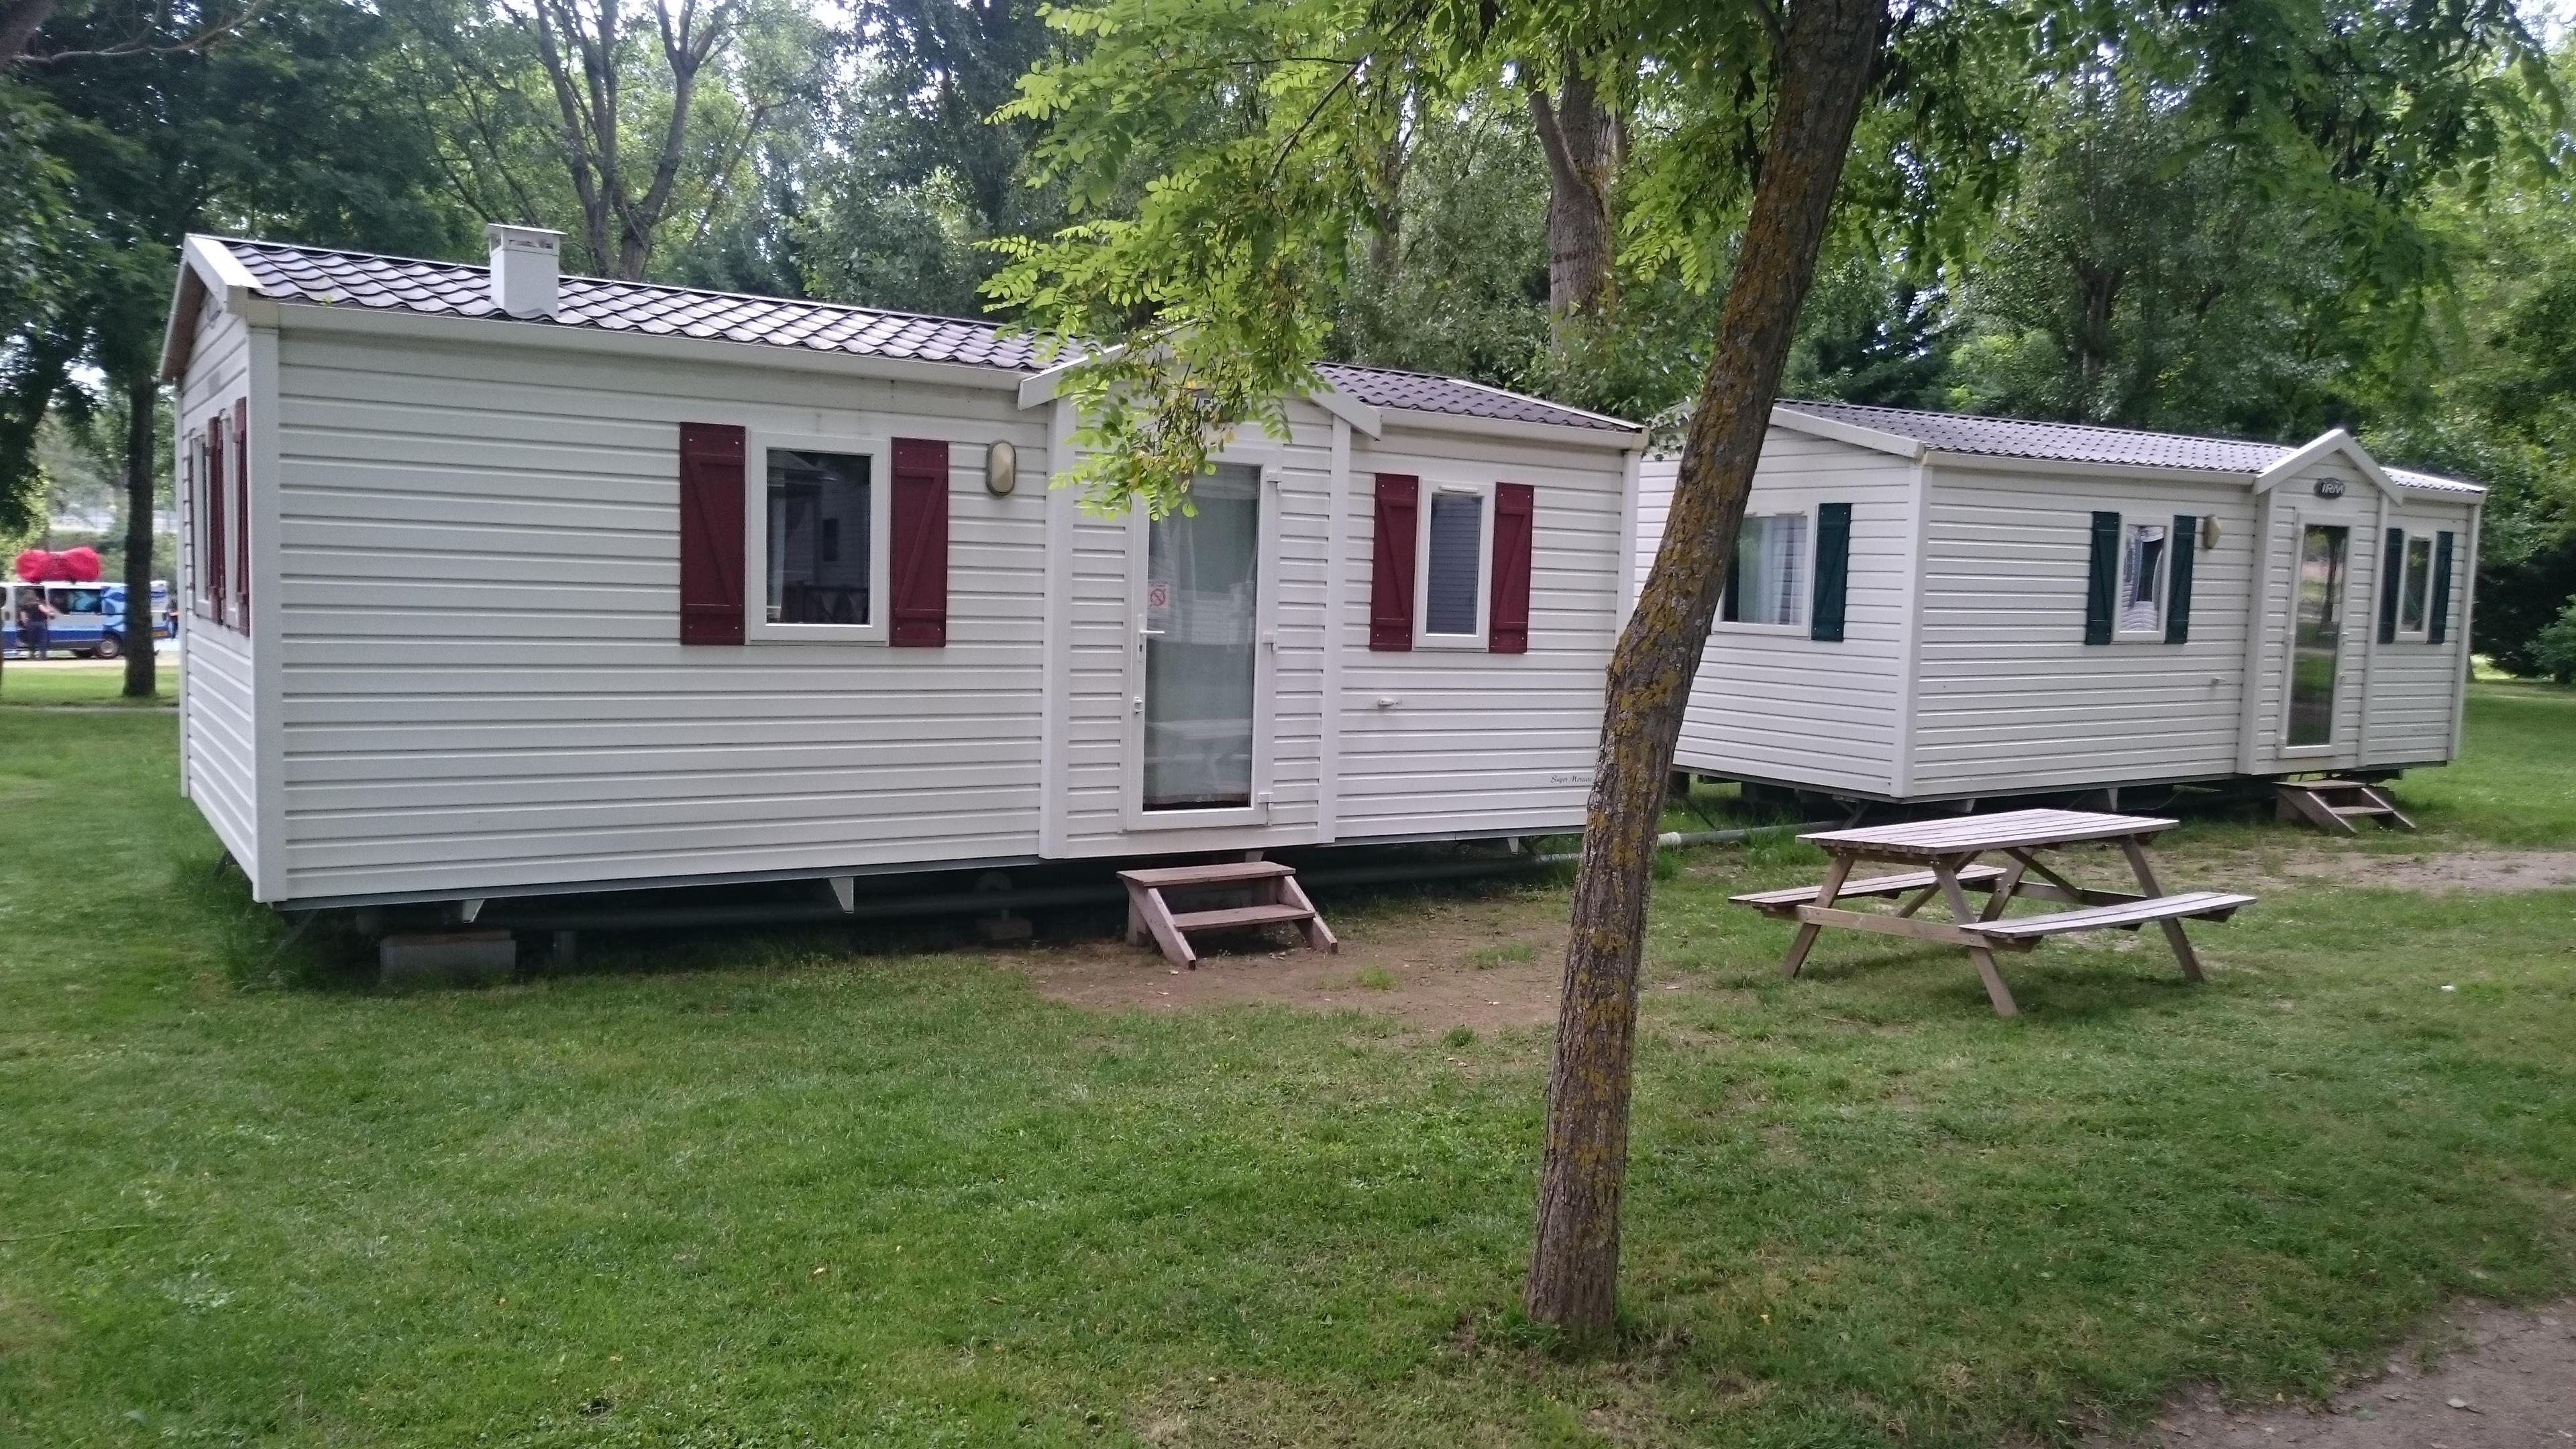 Mobil-home 32m² - 2 bedrooms